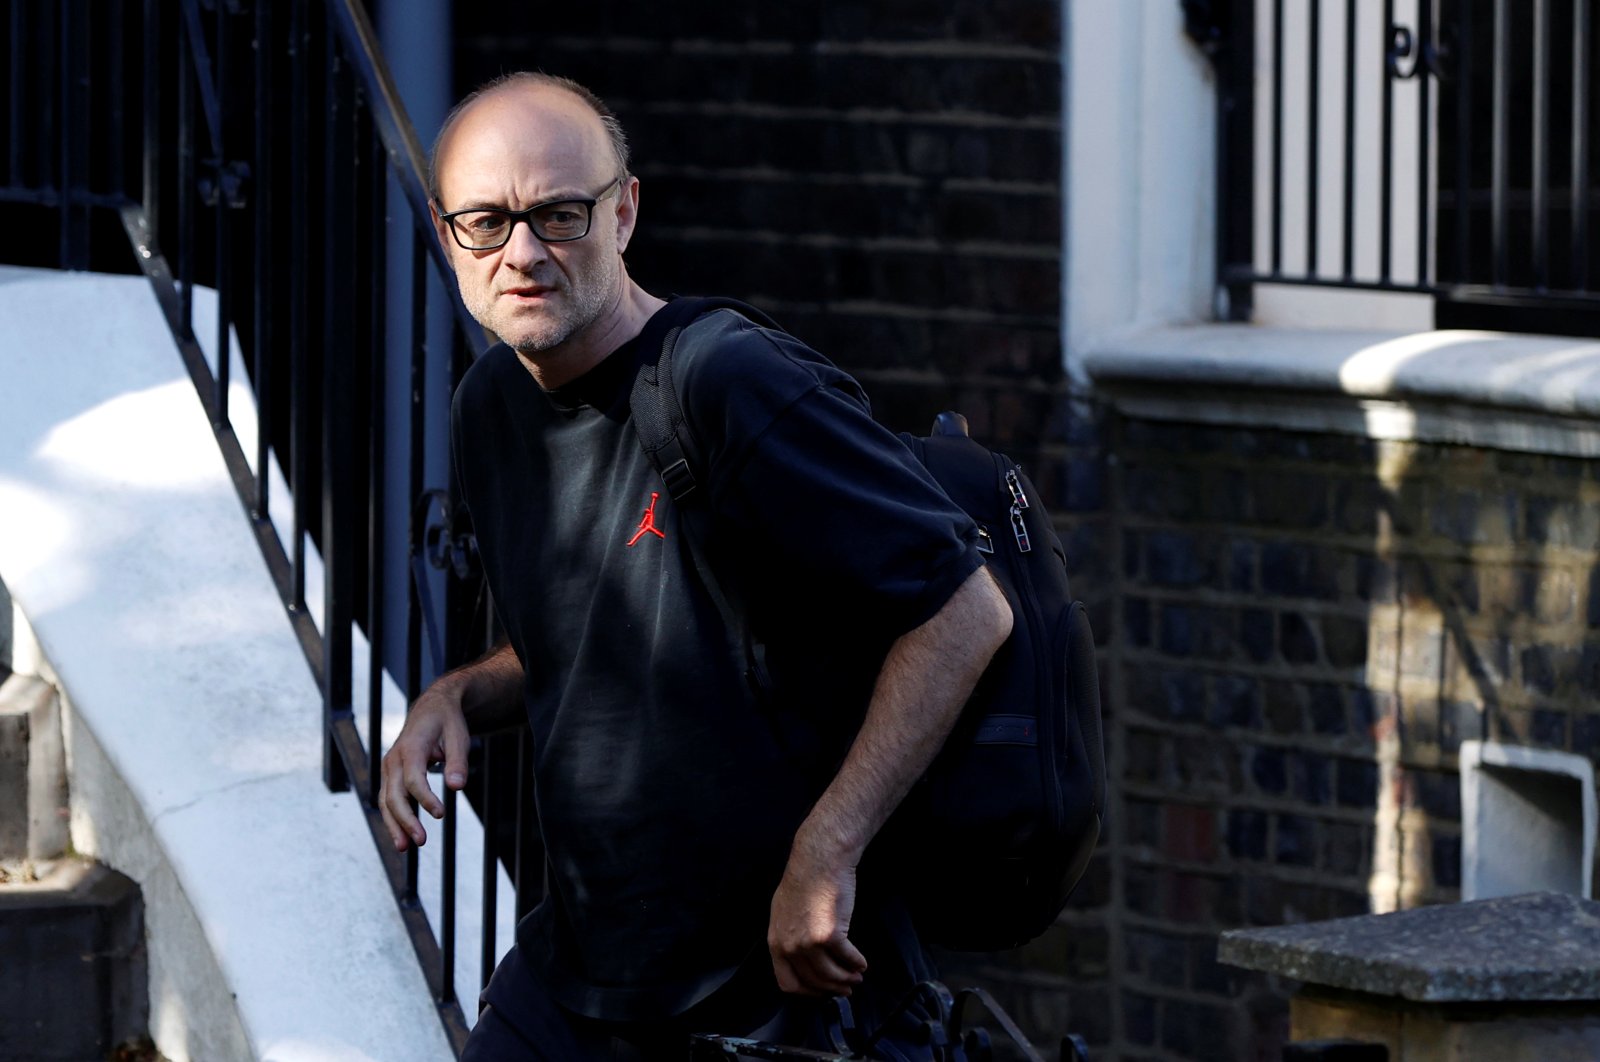 Dominic Cummings, special advisor for Britain's Prime Minister Boris Johnson leaves his home in London, following the coronavirus outbreak, London, May 29, 2020. (Reuters Photo)